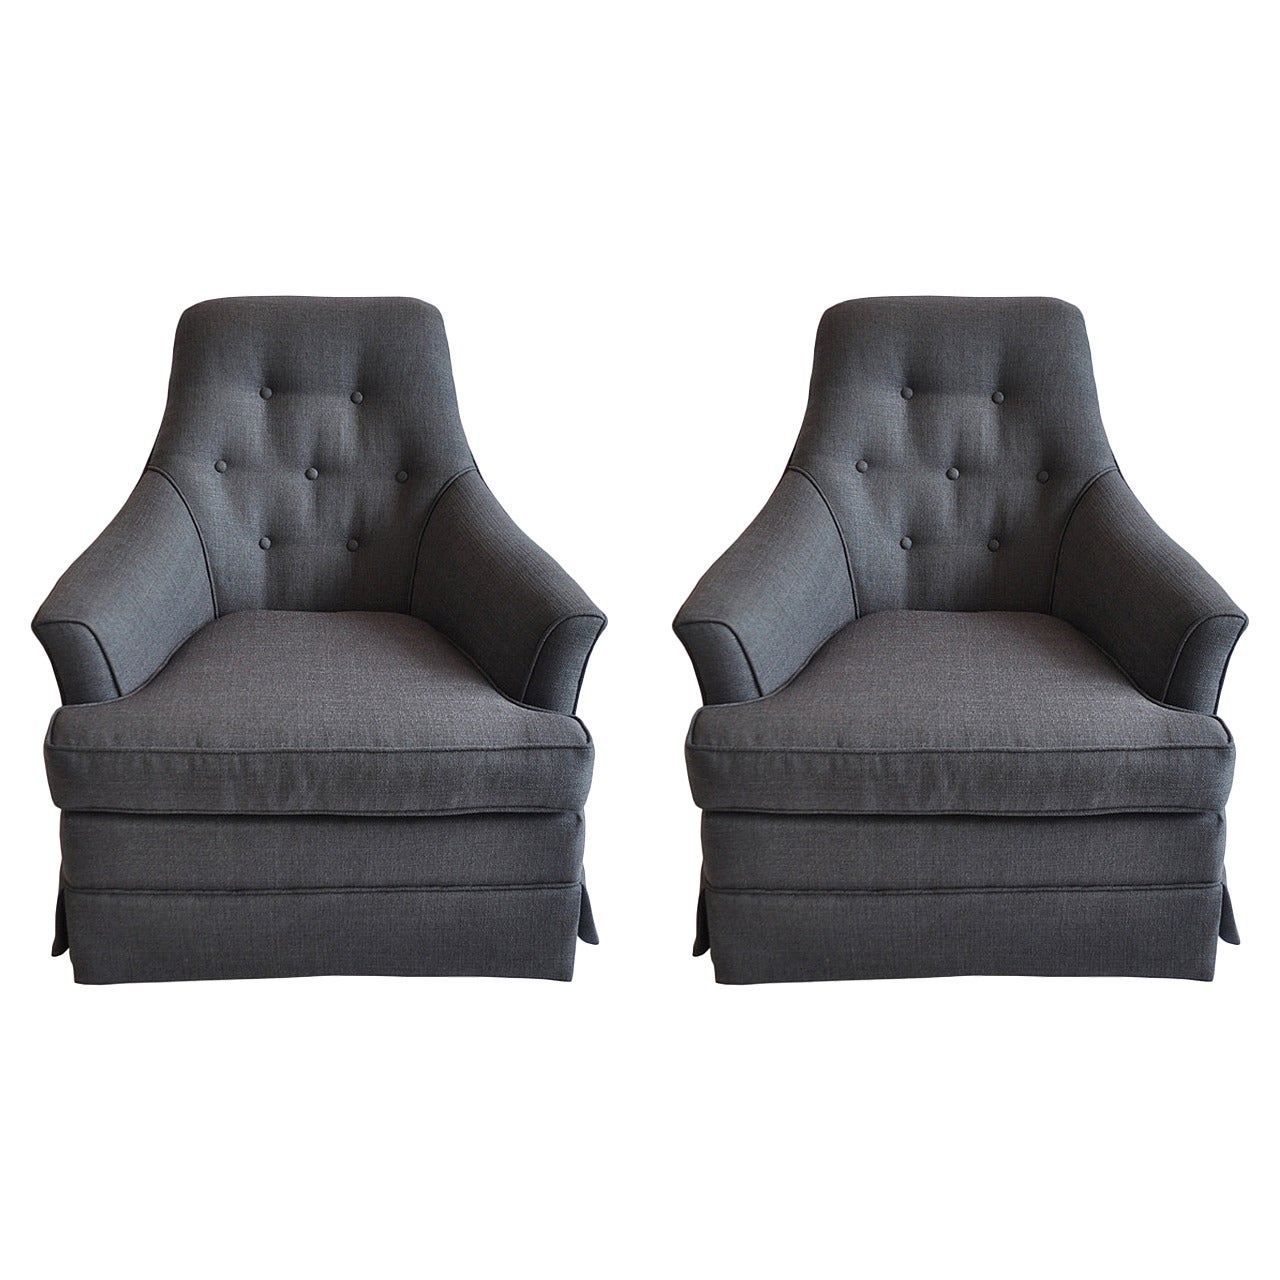 Pair of Hollywood Regency Tufted Club Chairs